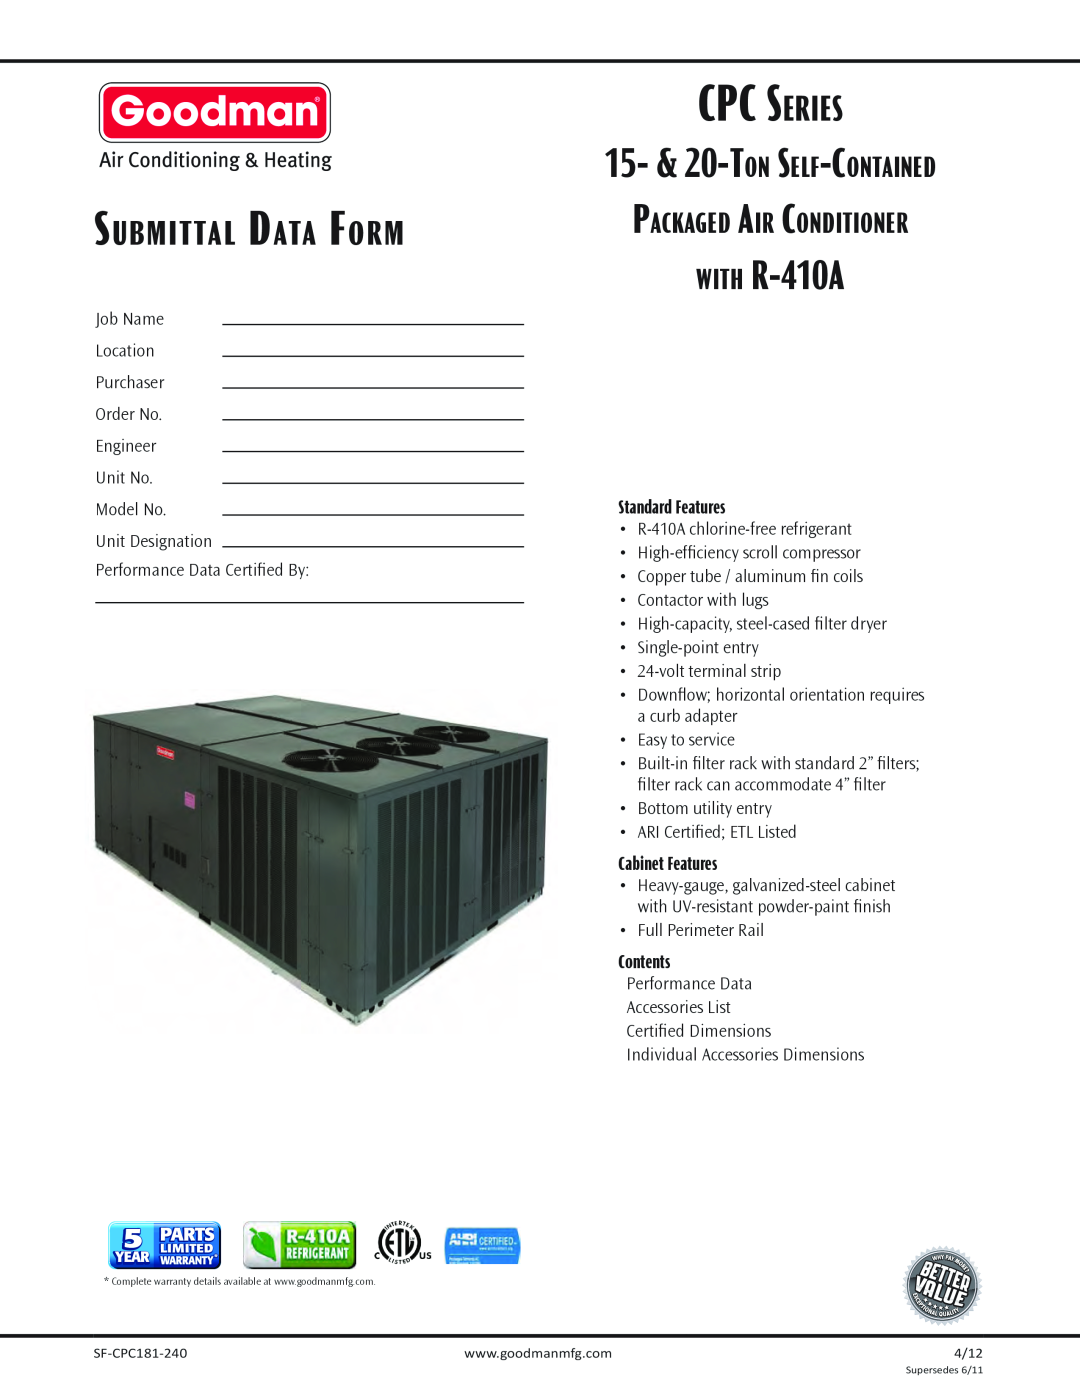 Goodman Mfg Self-Contained Packaged Air Conditioner with R-410A dimensions CPC Series, Submittal Data Form, Contents 